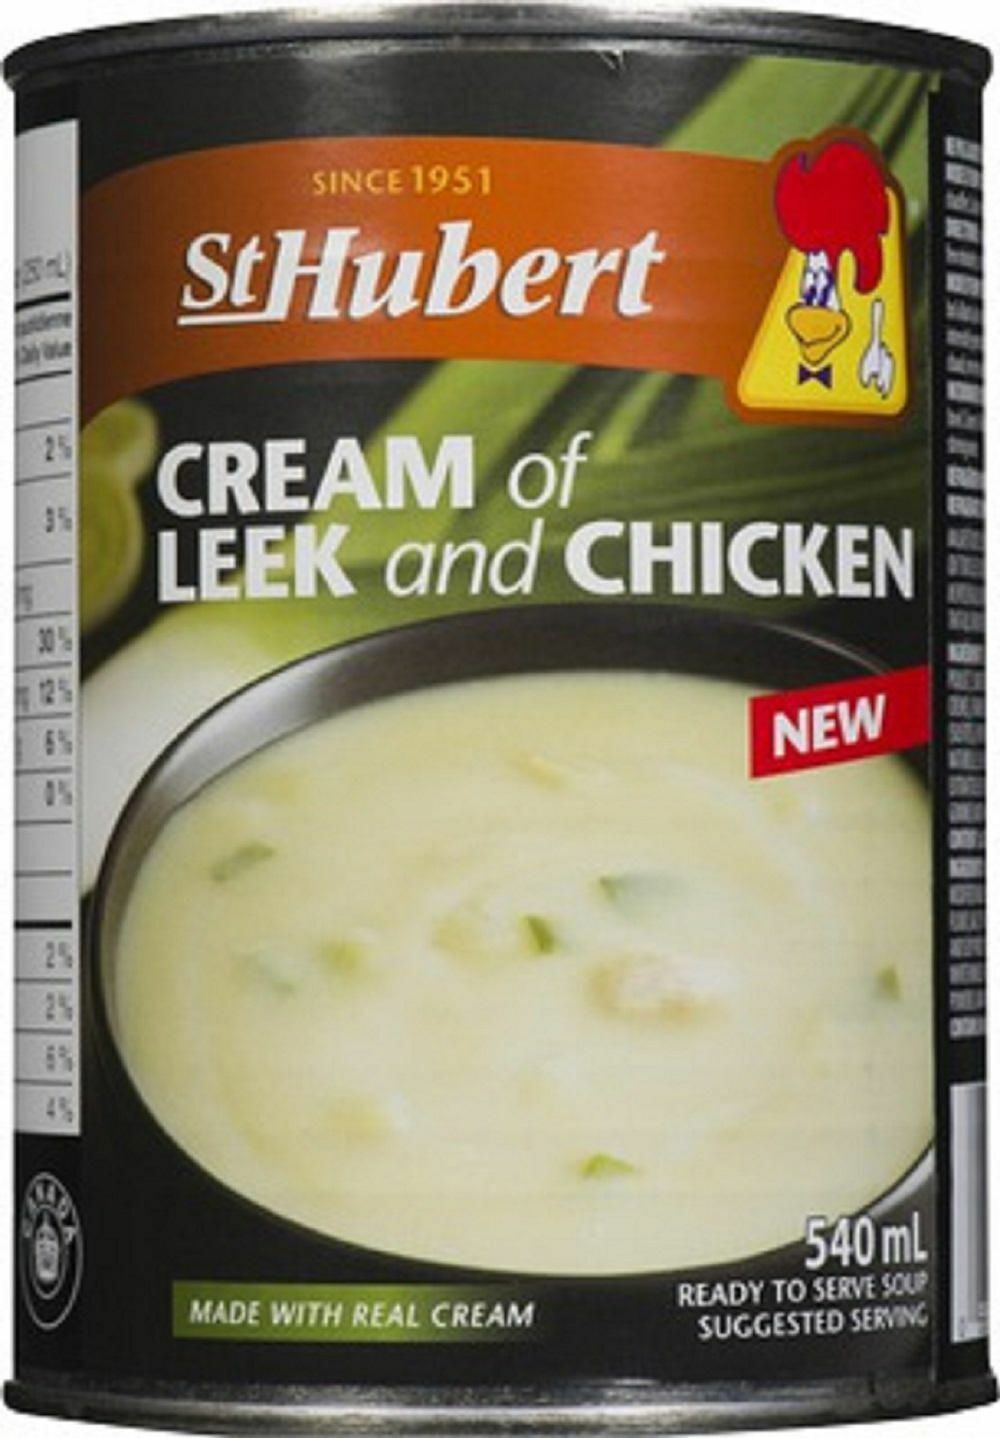 12 x St-Hubert Cream Of Leak And Chicken Soup 540mL/18.3 oz each-Free Shipping - $61.92